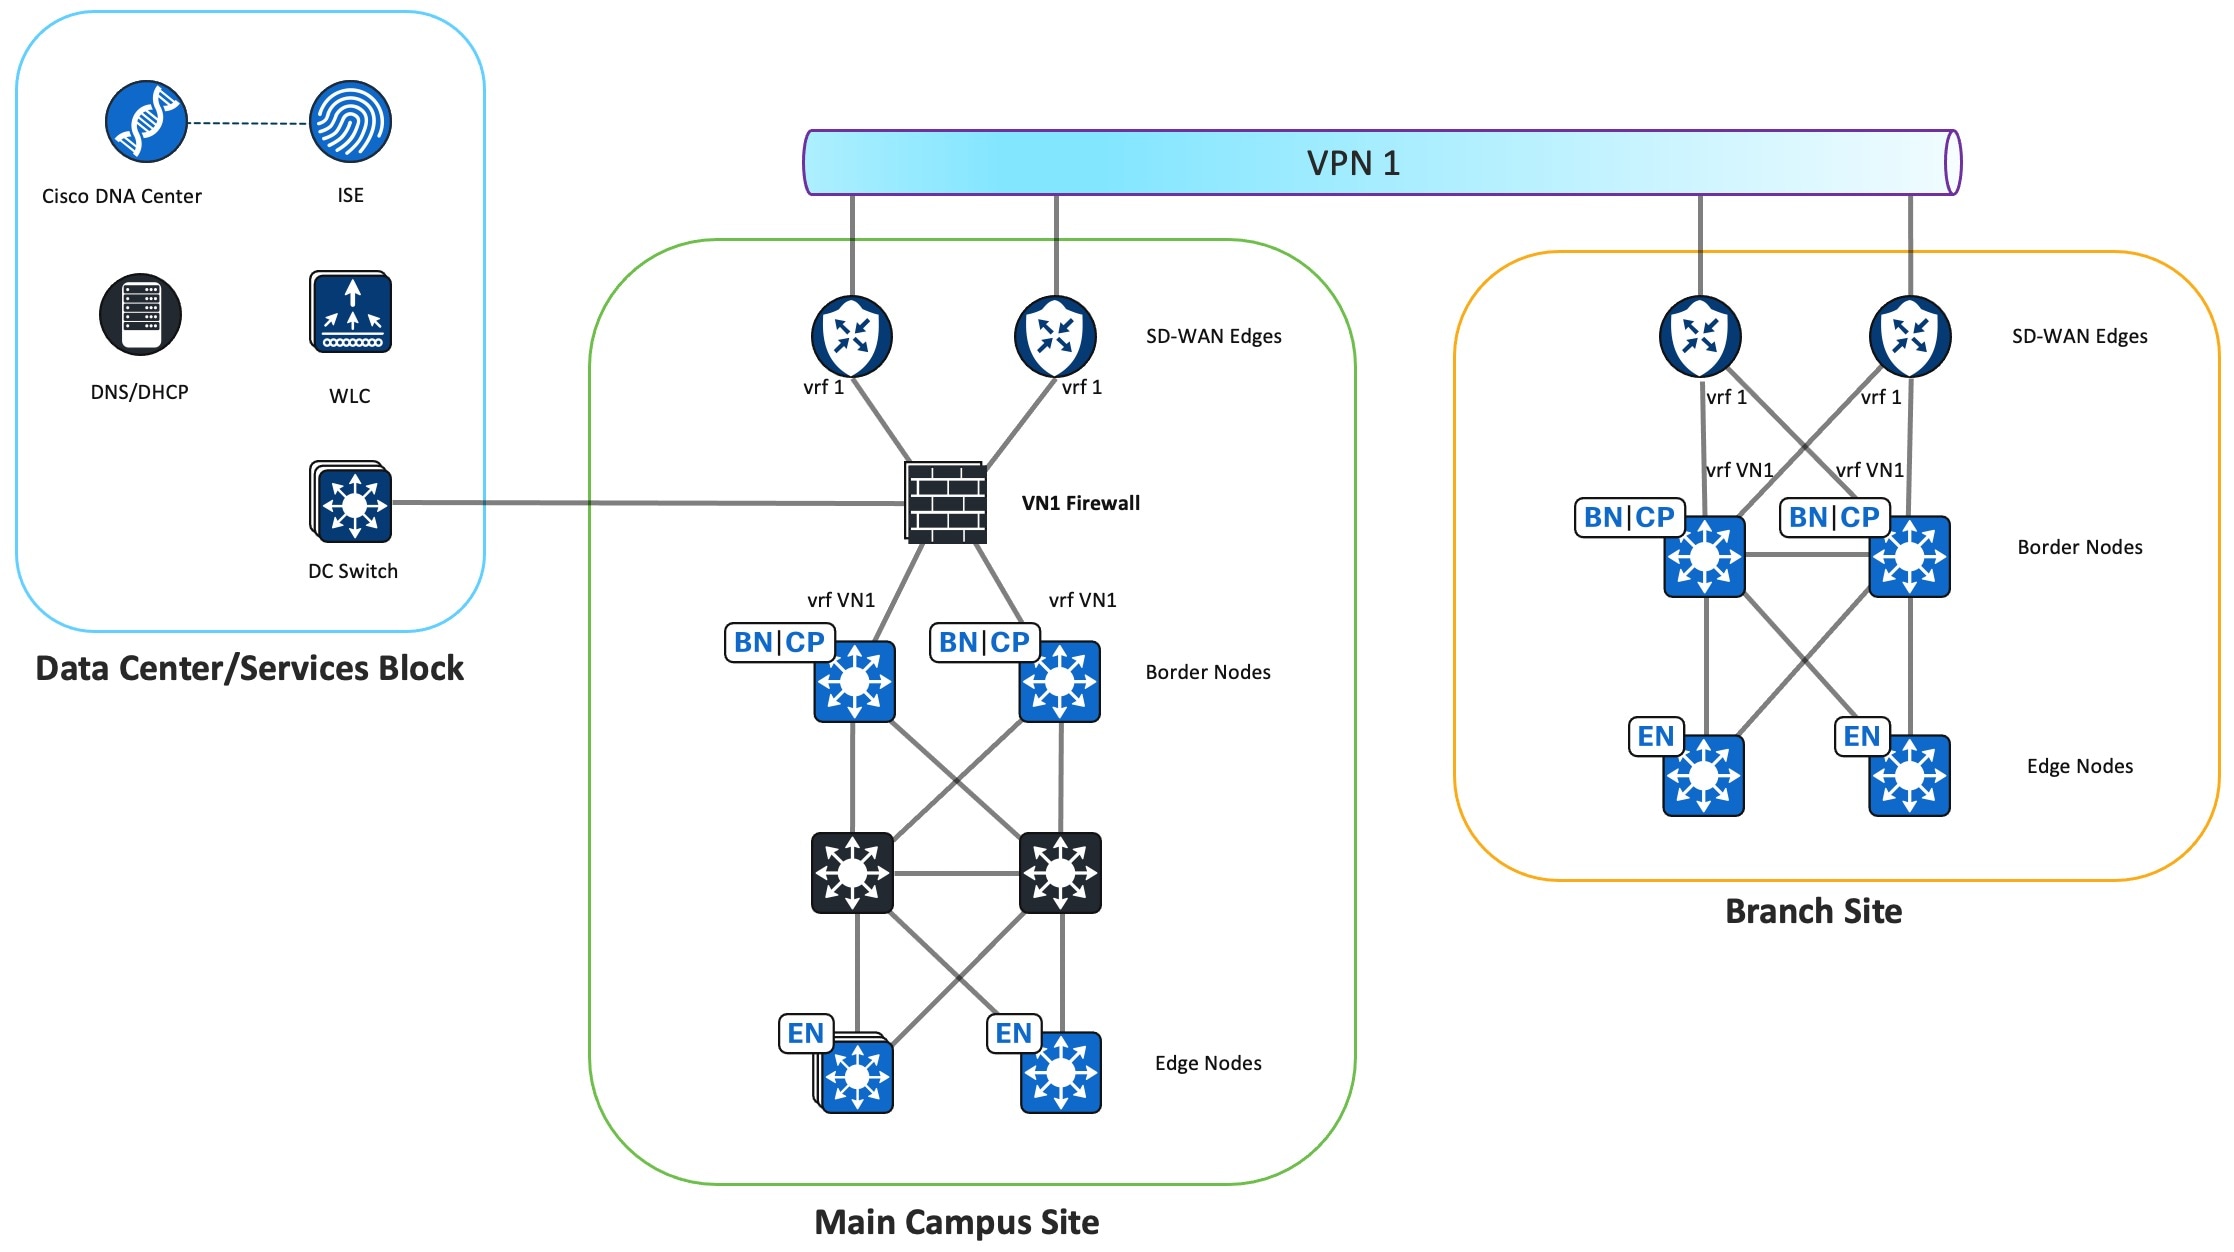 The VN Firewall Instance topology displays VN1 Firewall located in the main campus site. This firewall connects to the data center and VPN 1. VPN 1 also connects to the branch site.